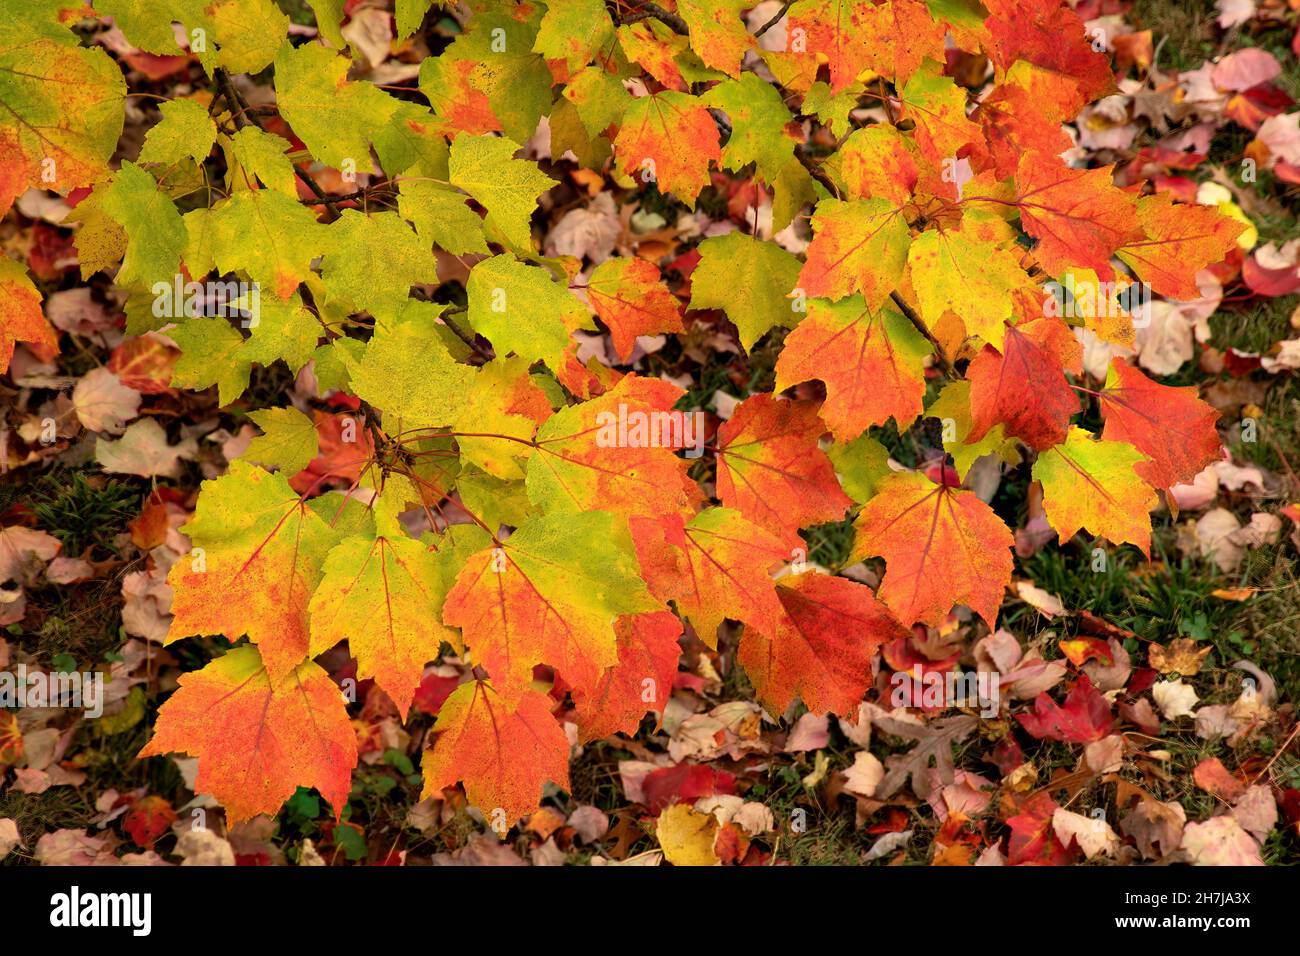 Changing seasons - nature's transition from summer to fall. Colorful branch of maple leaves; some still green, others transitioning to  autumn colors. Stock Photo